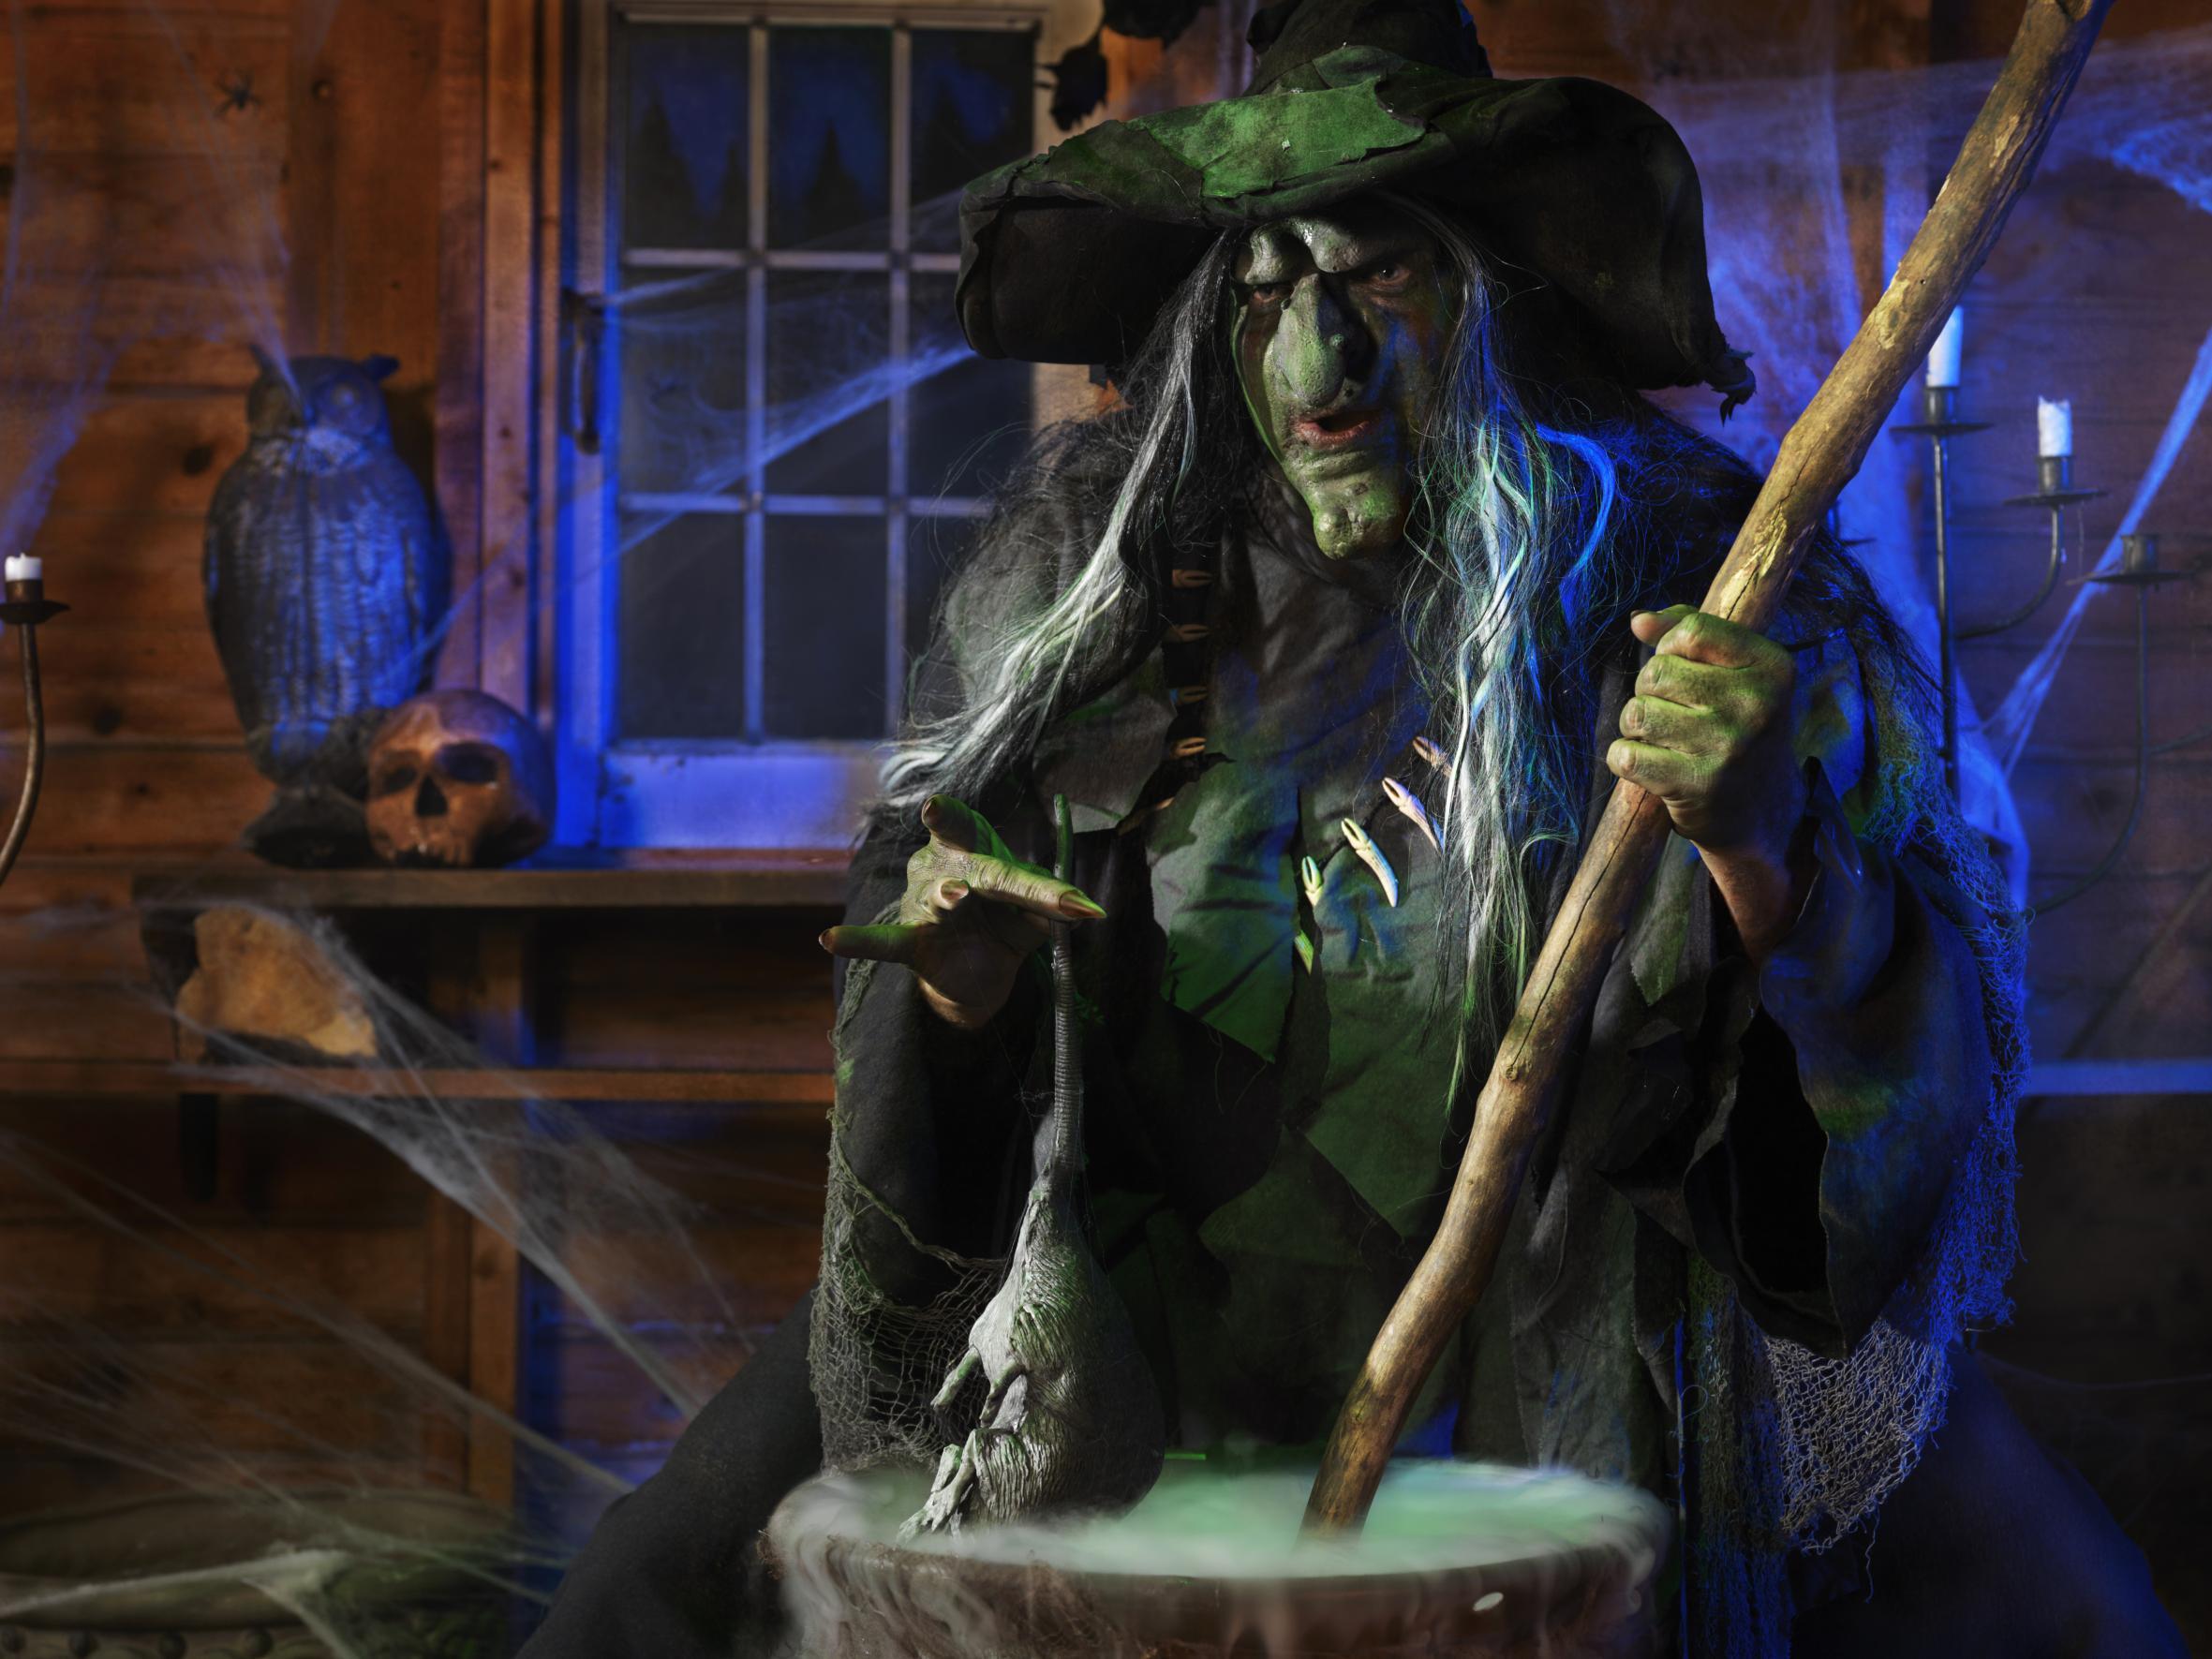 Until recently, offering witchcraft services could be punished with up to six months in prison and a $2000 fine in Canada